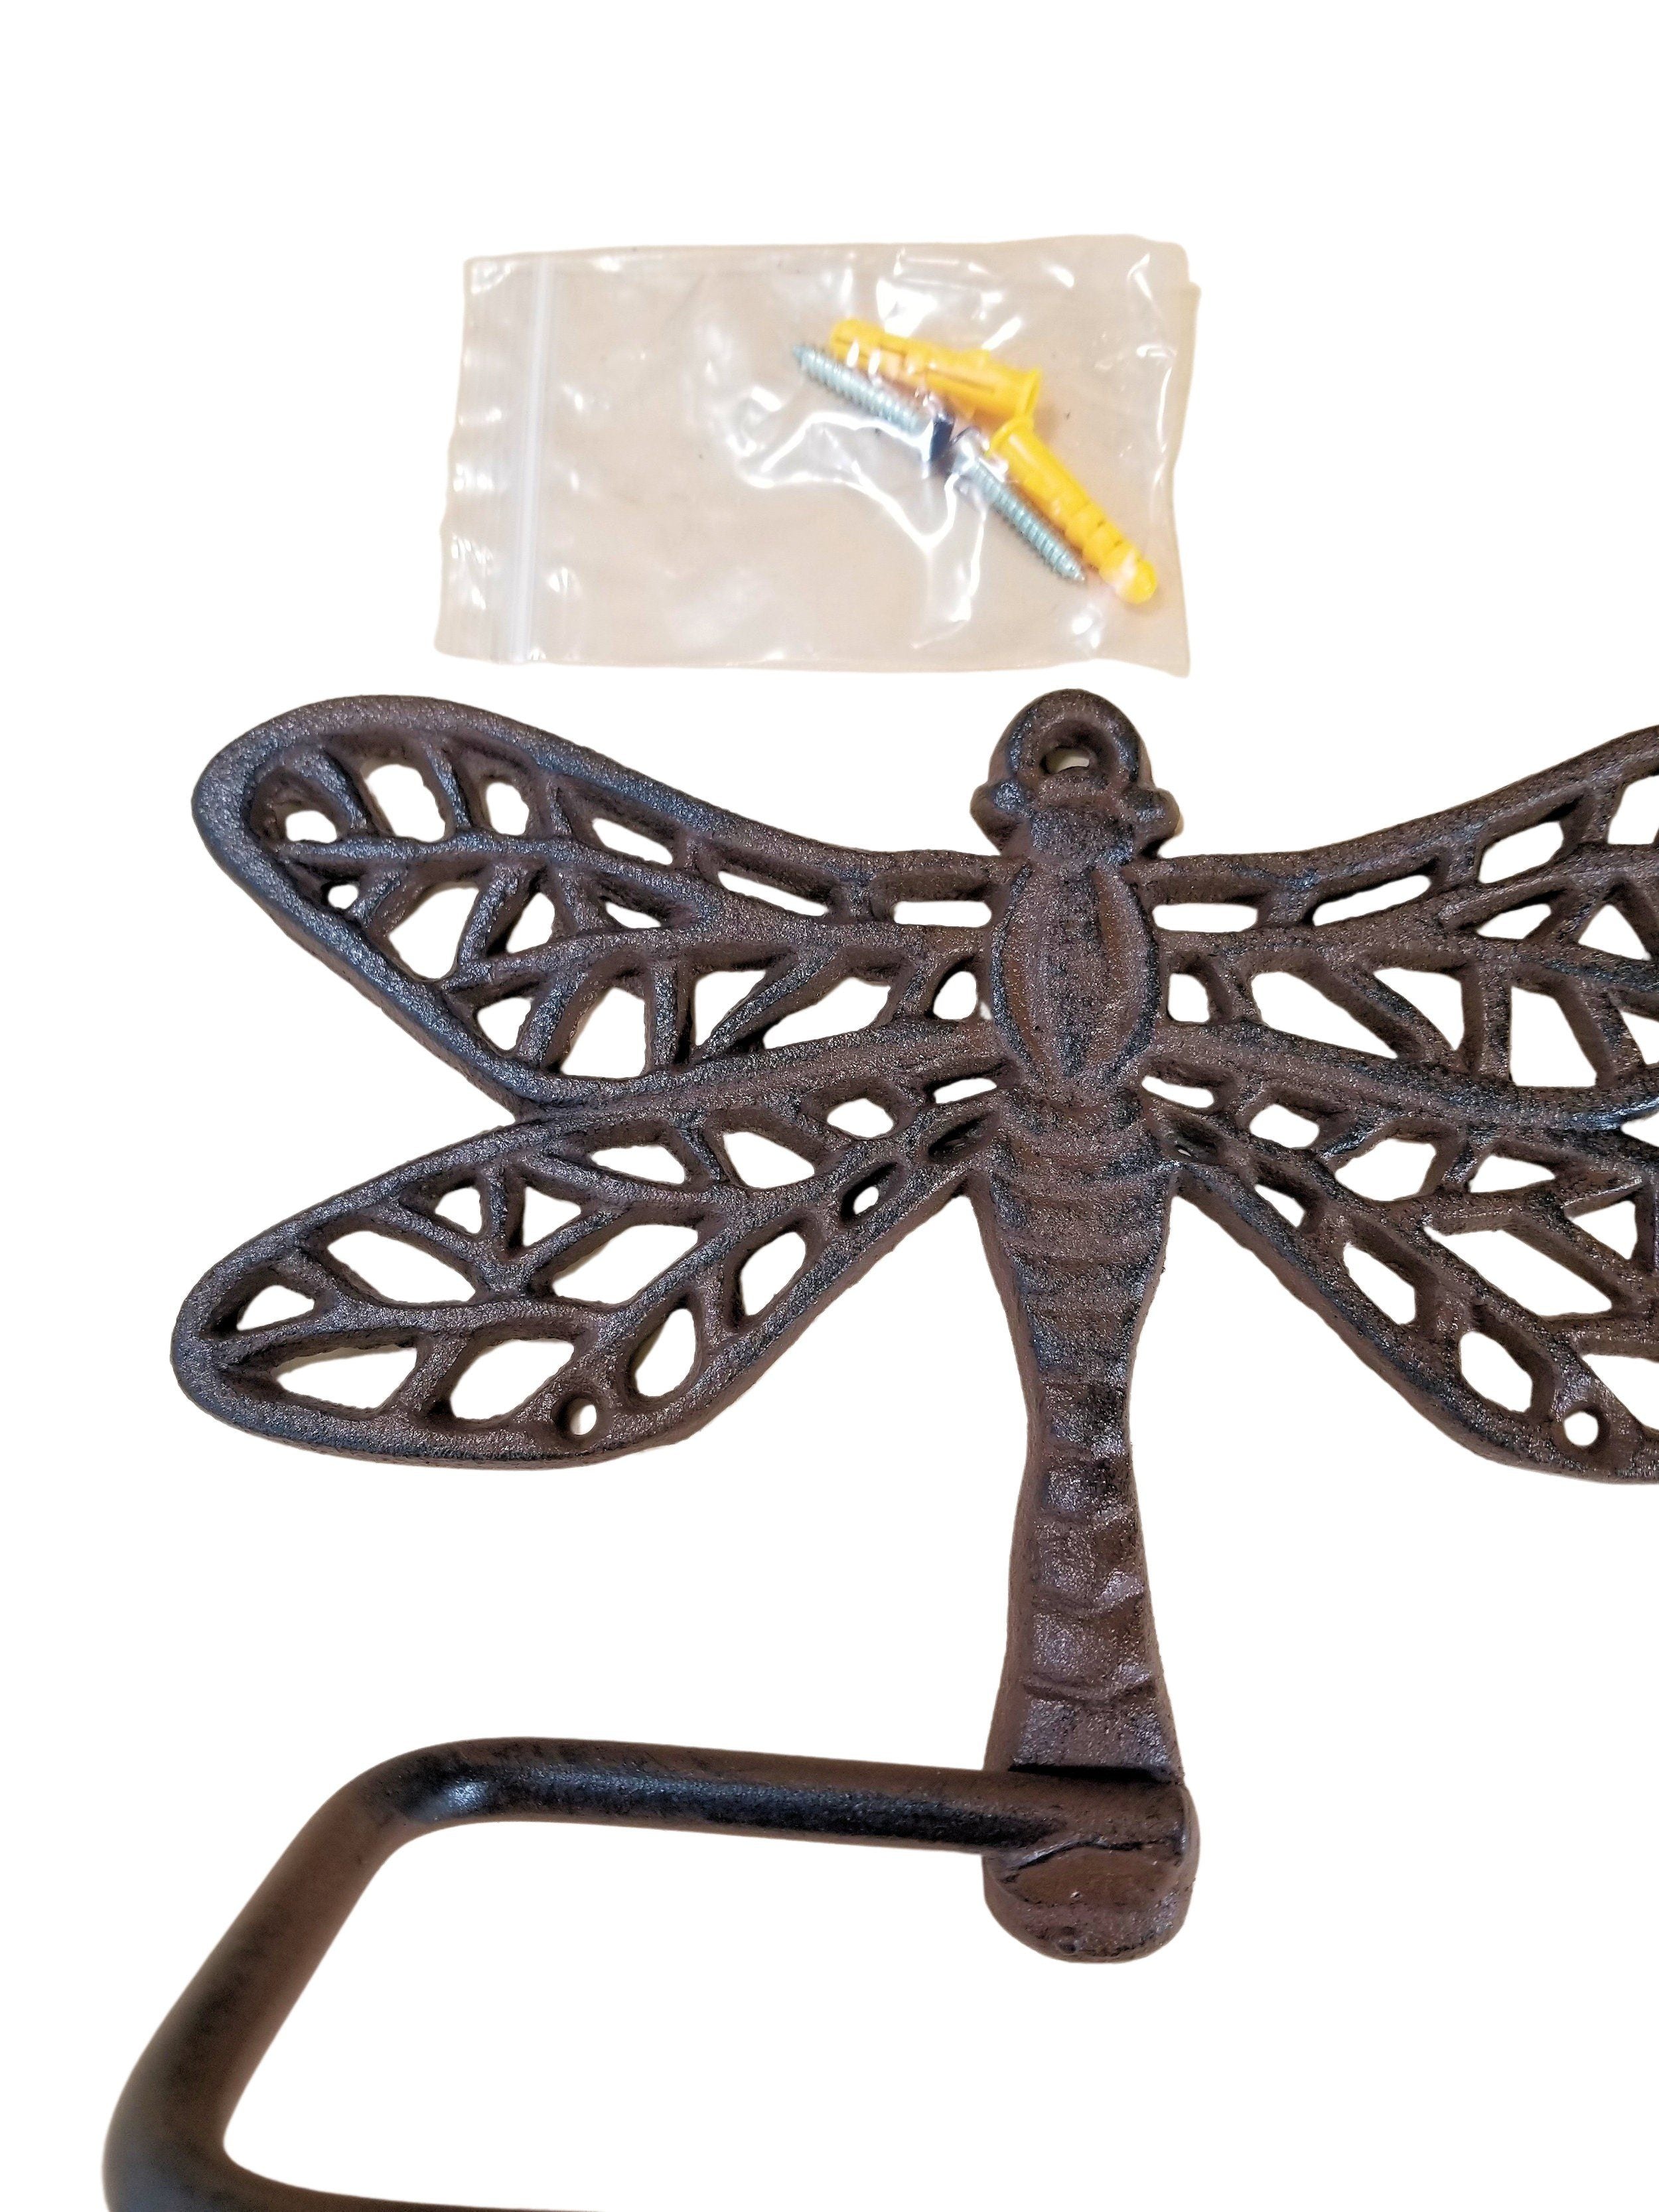 Cast Iron Dragonfly Toilet Paper Holder Brown w/ Hardware bathroom accessory Carvers Olde Iron 